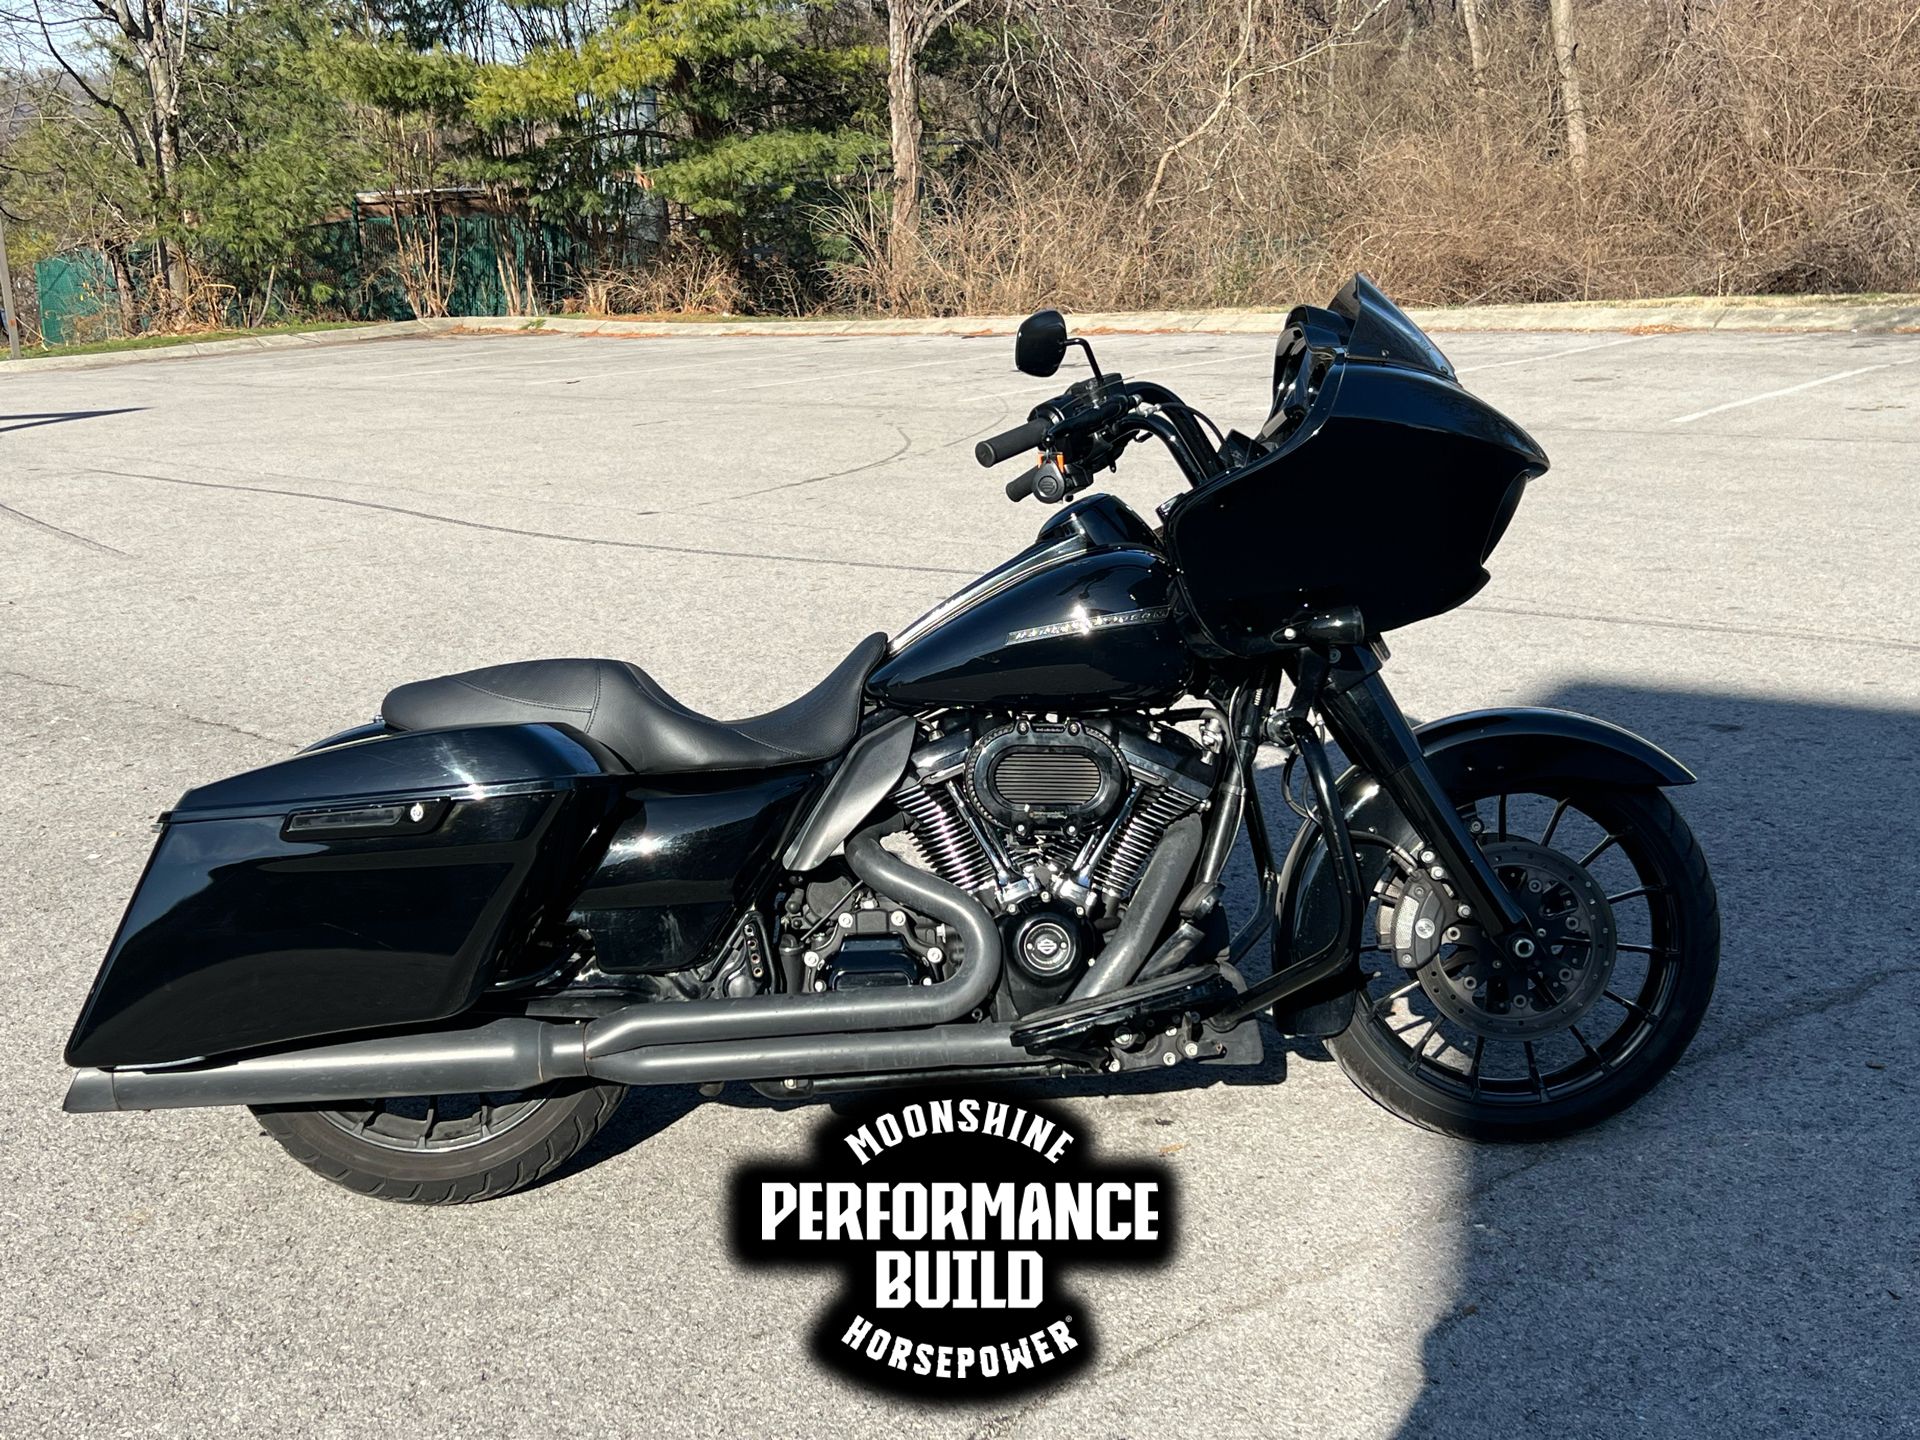 2019 Harley-Davidson Road Glide® Special in Franklin, Tennessee - Photo 1